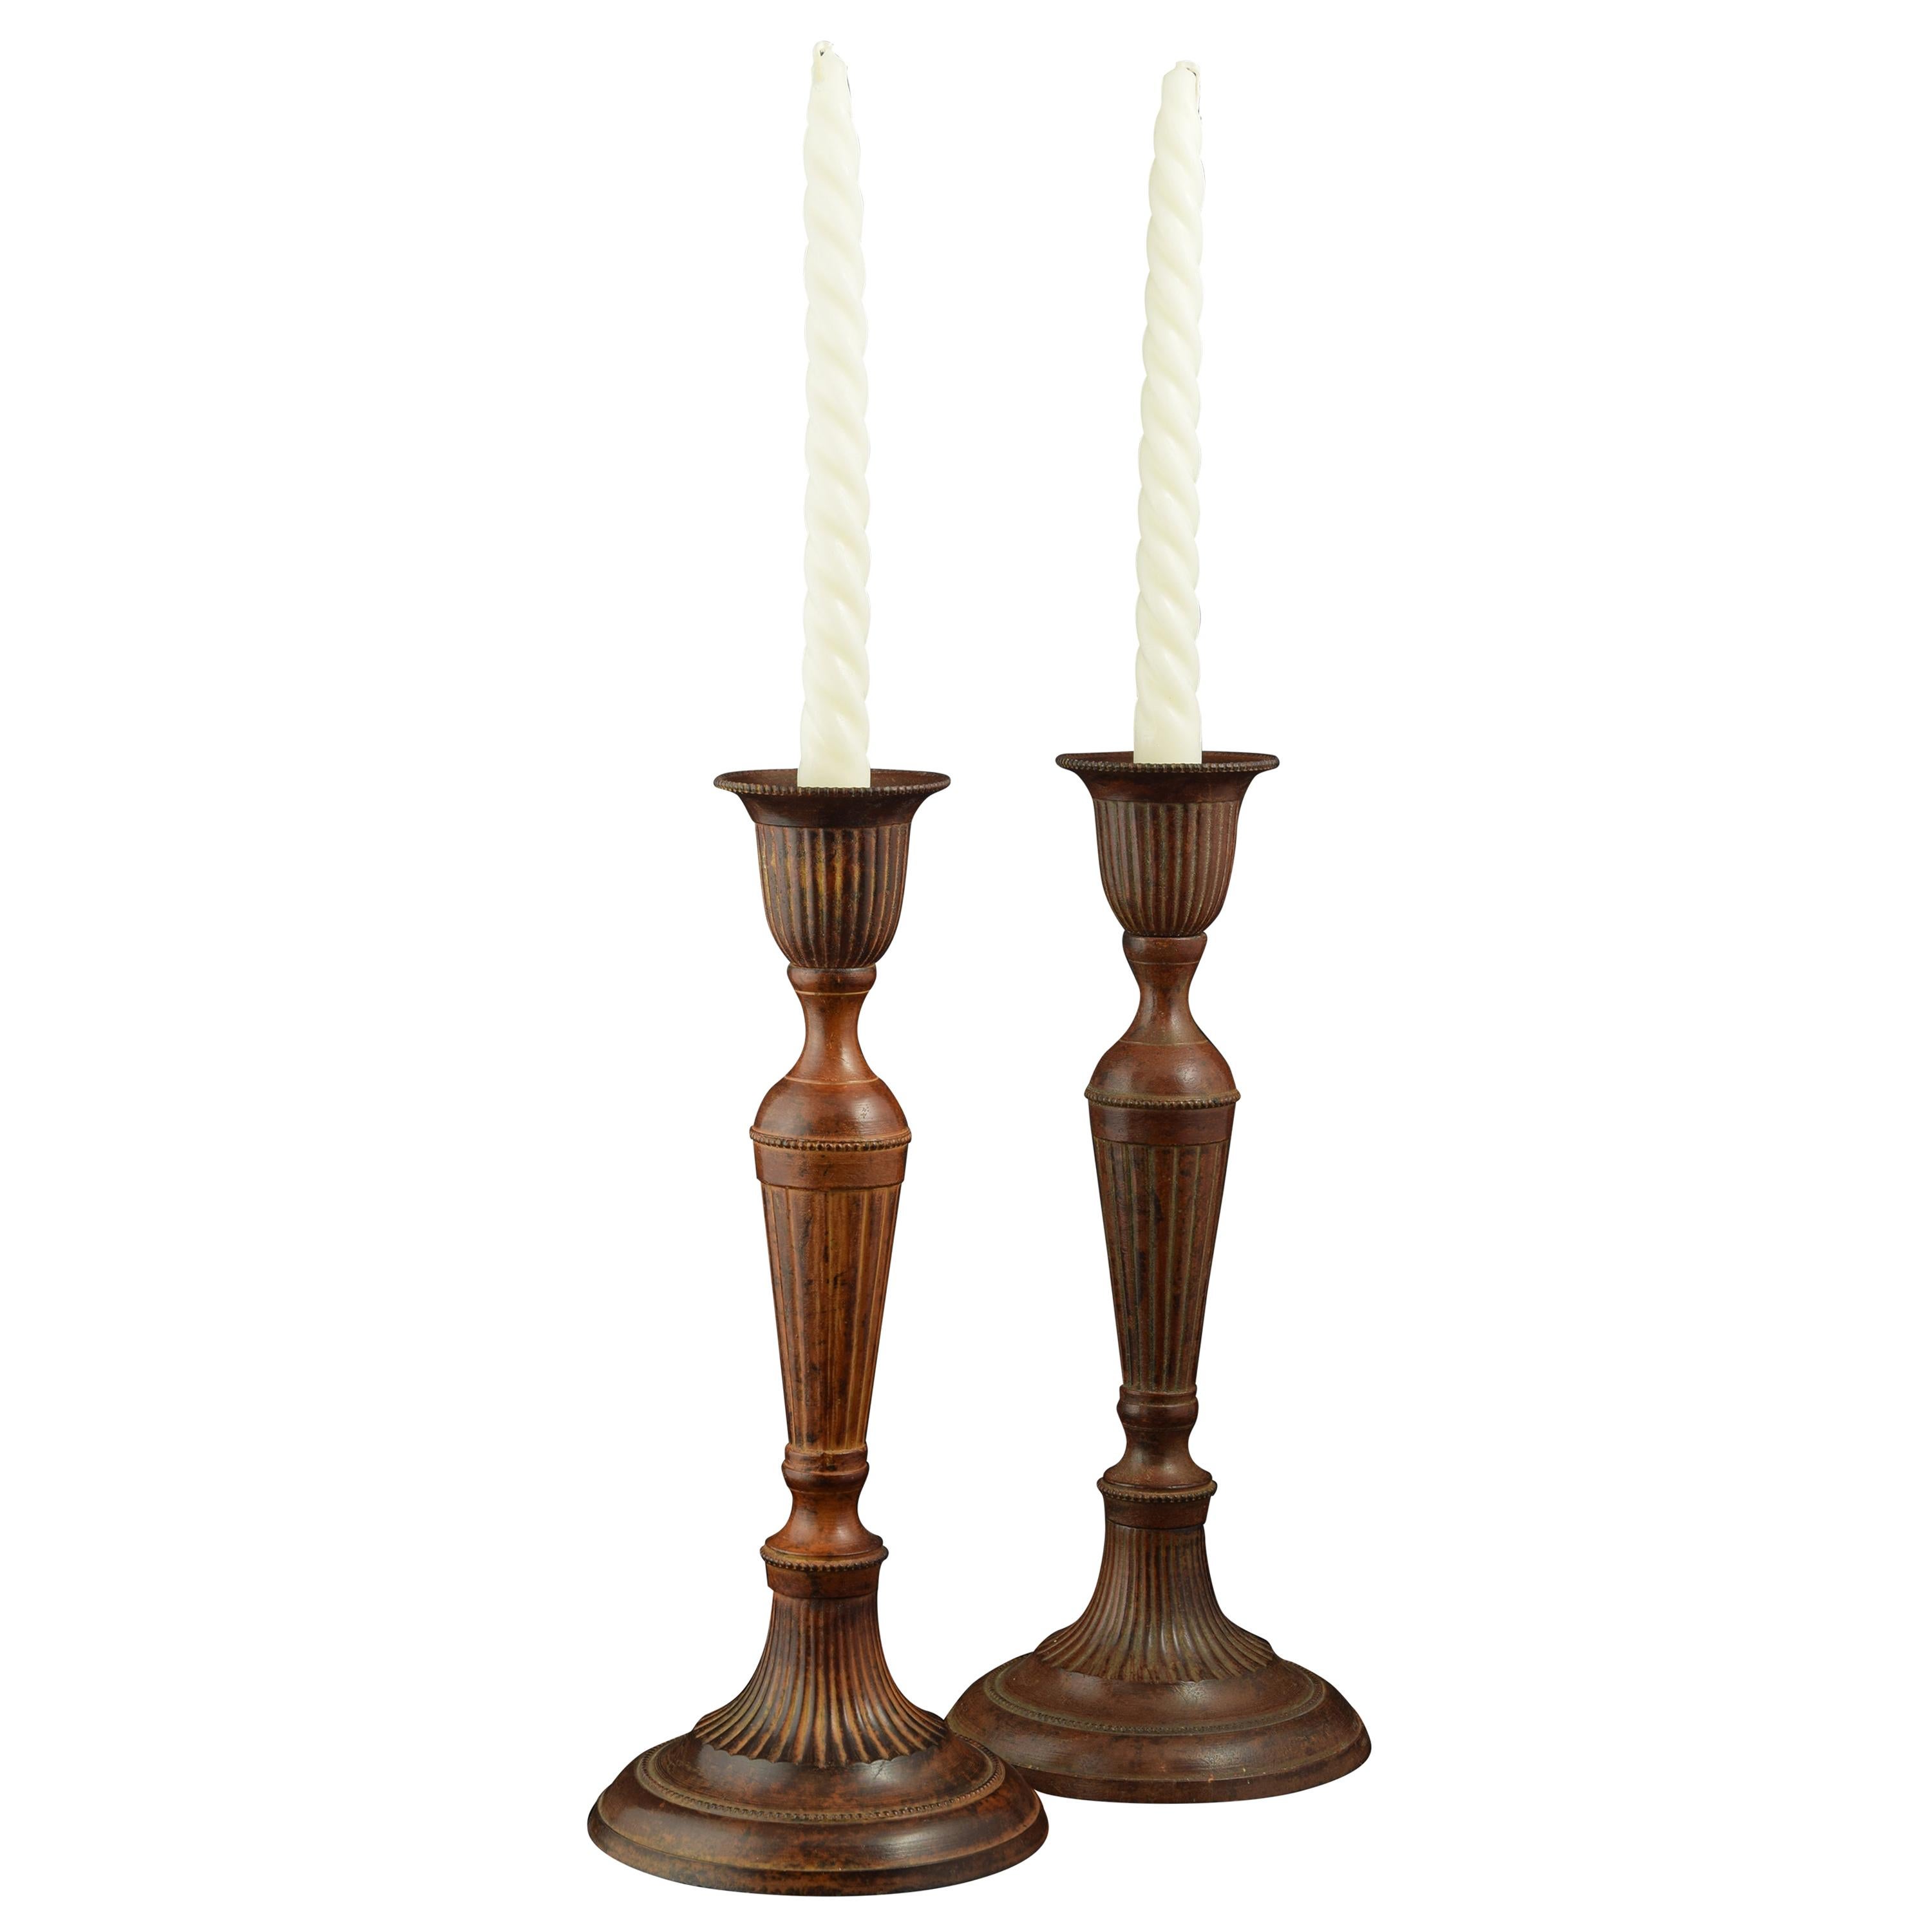 Pair of Candlesticks or Candleholders, Patinated Bronze